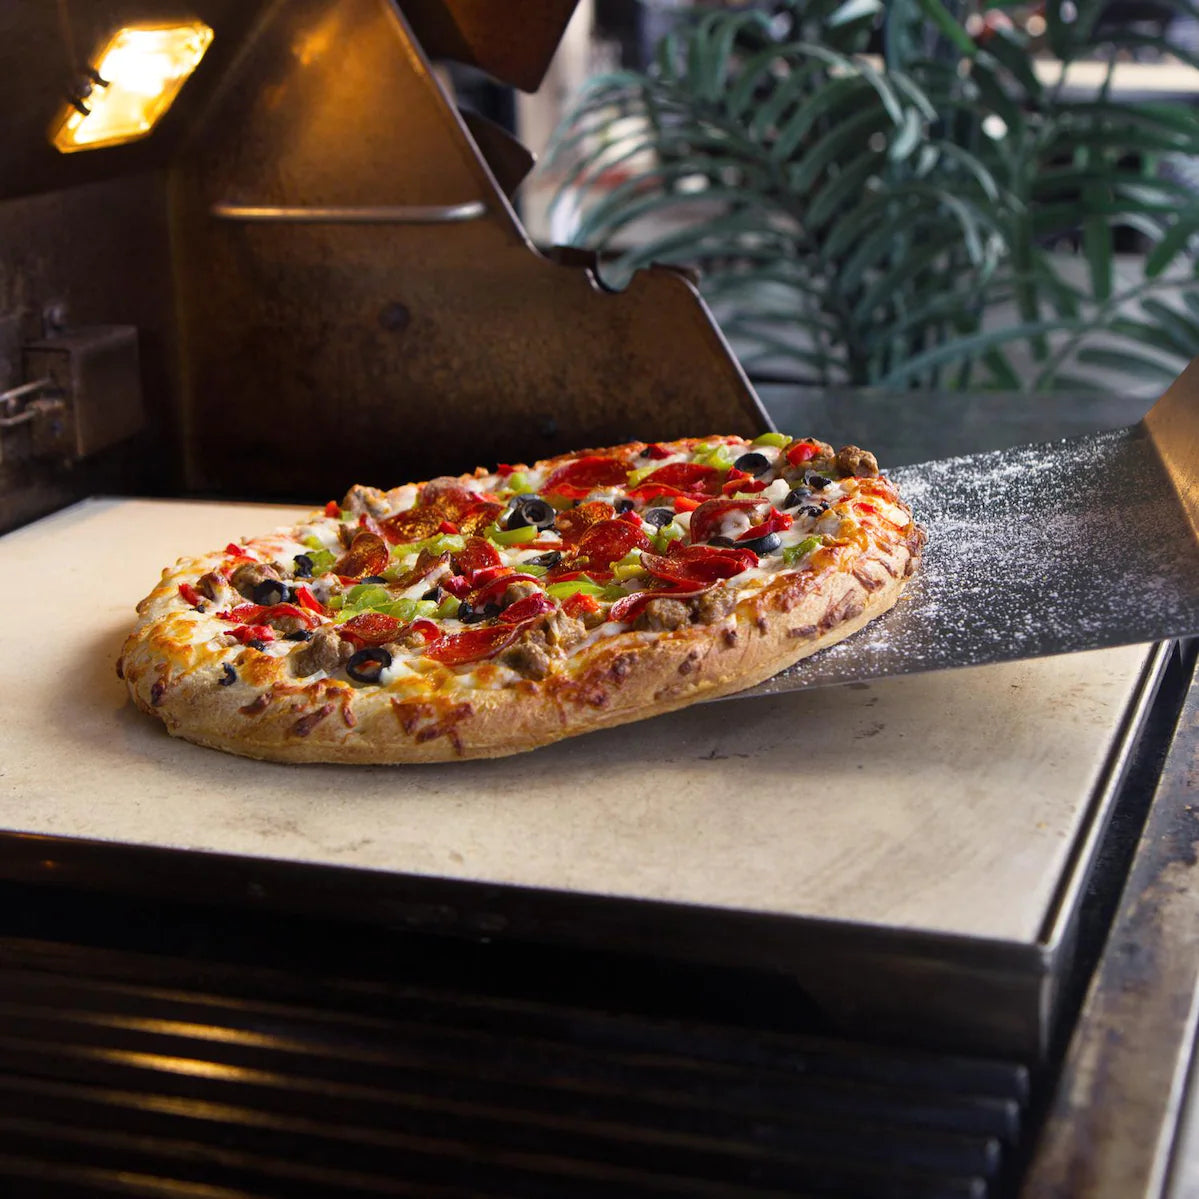 Blaze 14 3/4 Inch Stainless Steel Pizza Stone Tray Cooking Pizza On a Blaze Professional Gas Grill